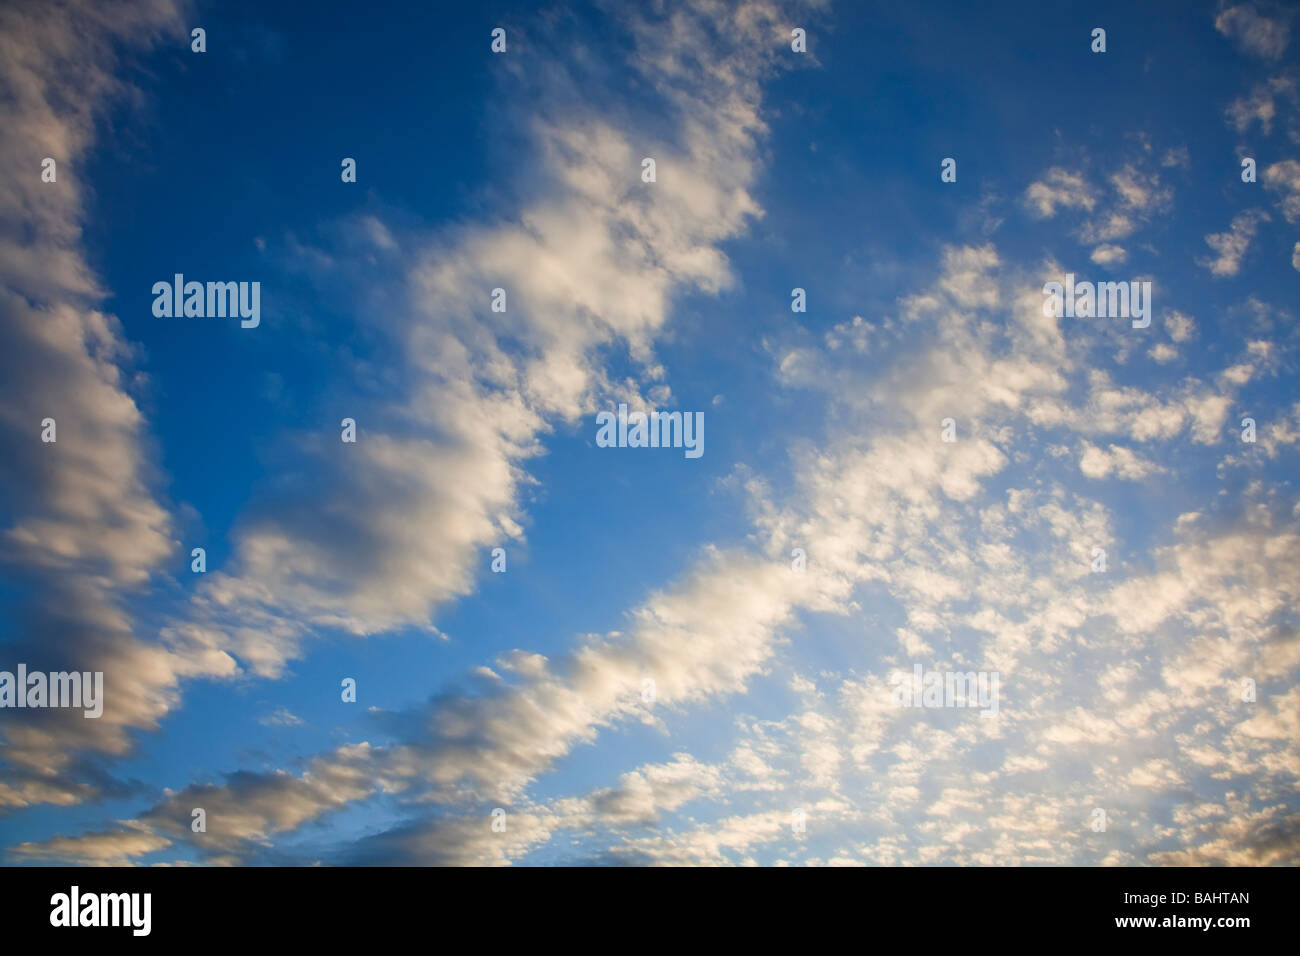 Altocumulus Cloud formation on a blue sky day Stock Photo